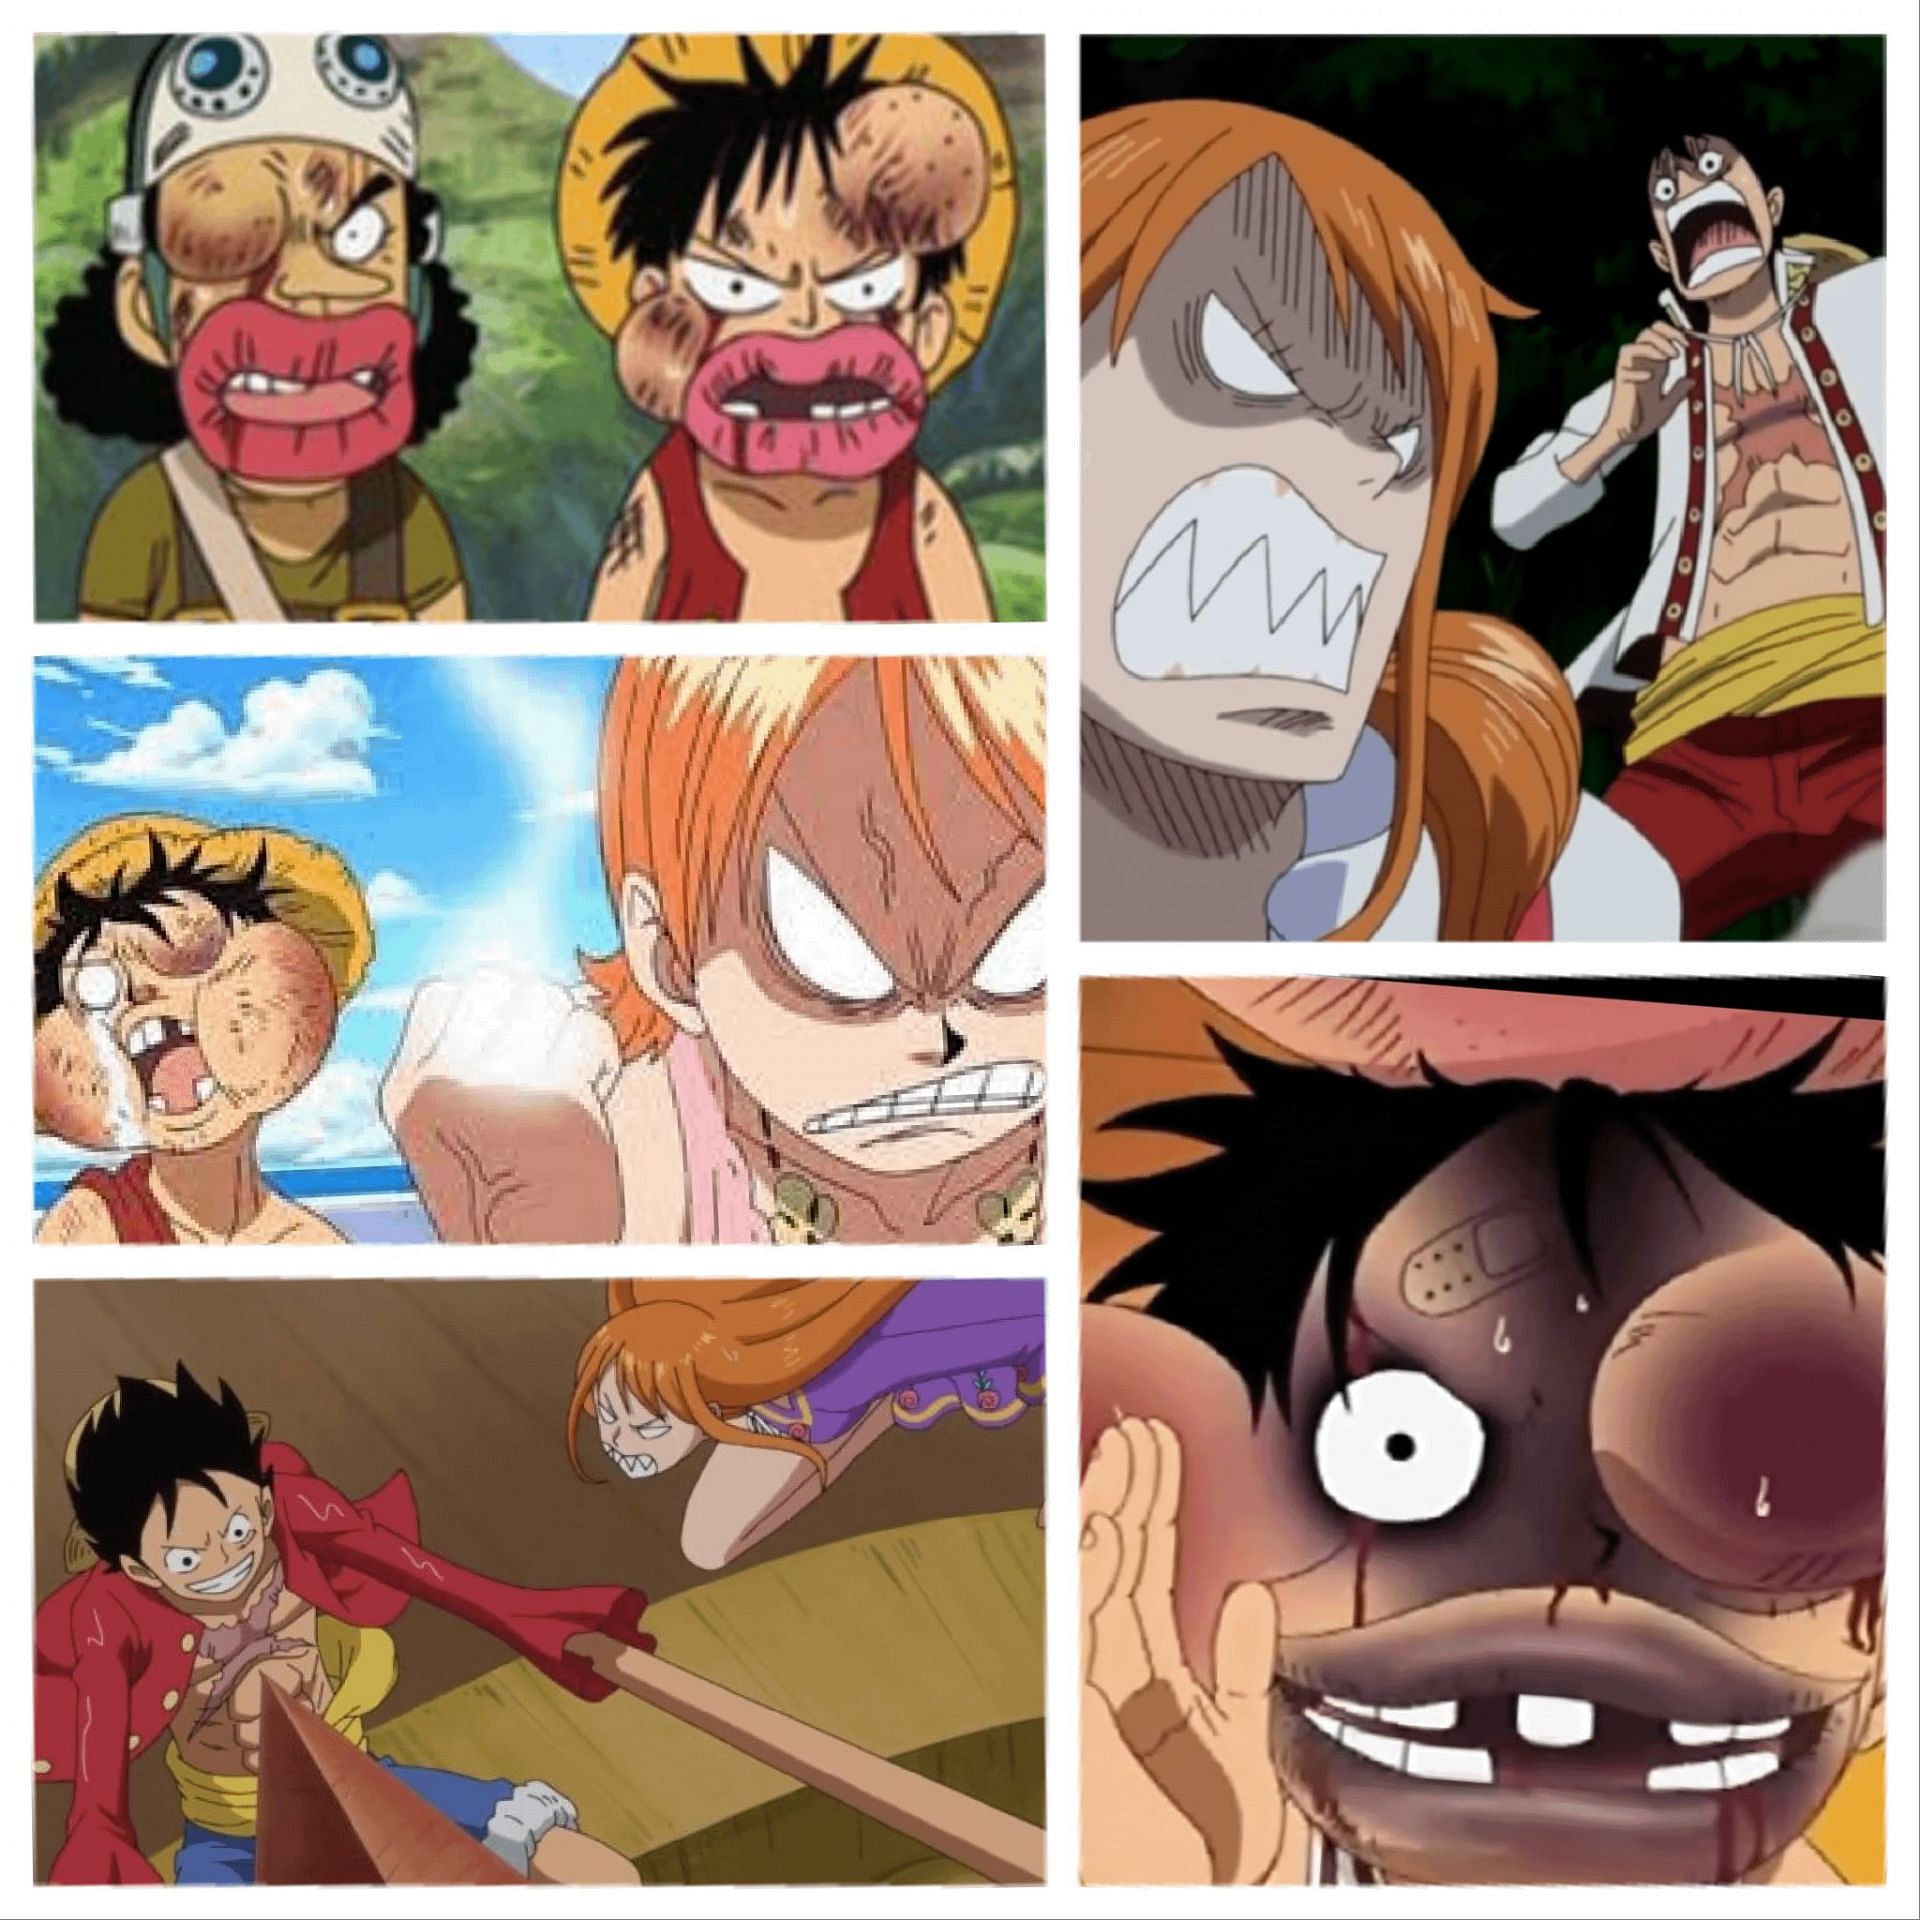 A collage of instances where Nami disciplines members of the Straw Hat crew (Image via Reddit thread r/OnePiece)